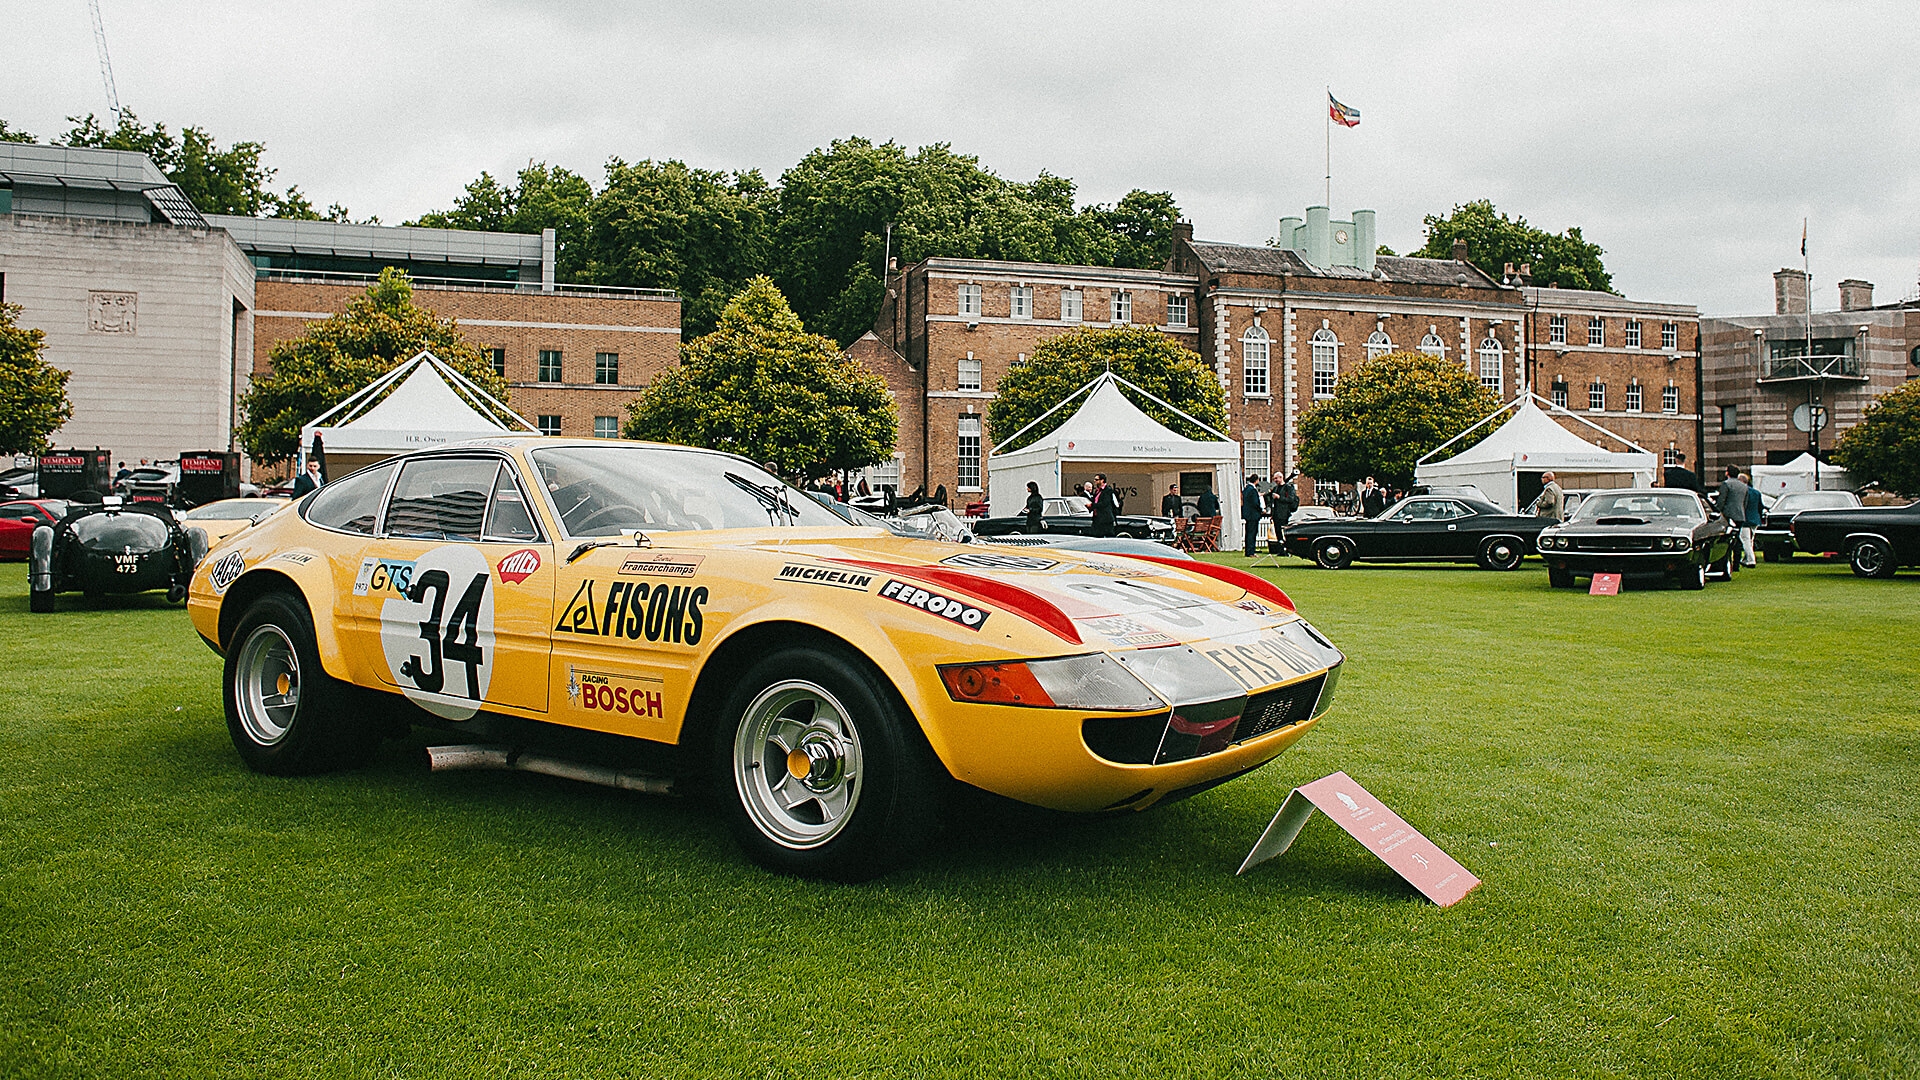 The City Concours – a new event in the heart of London